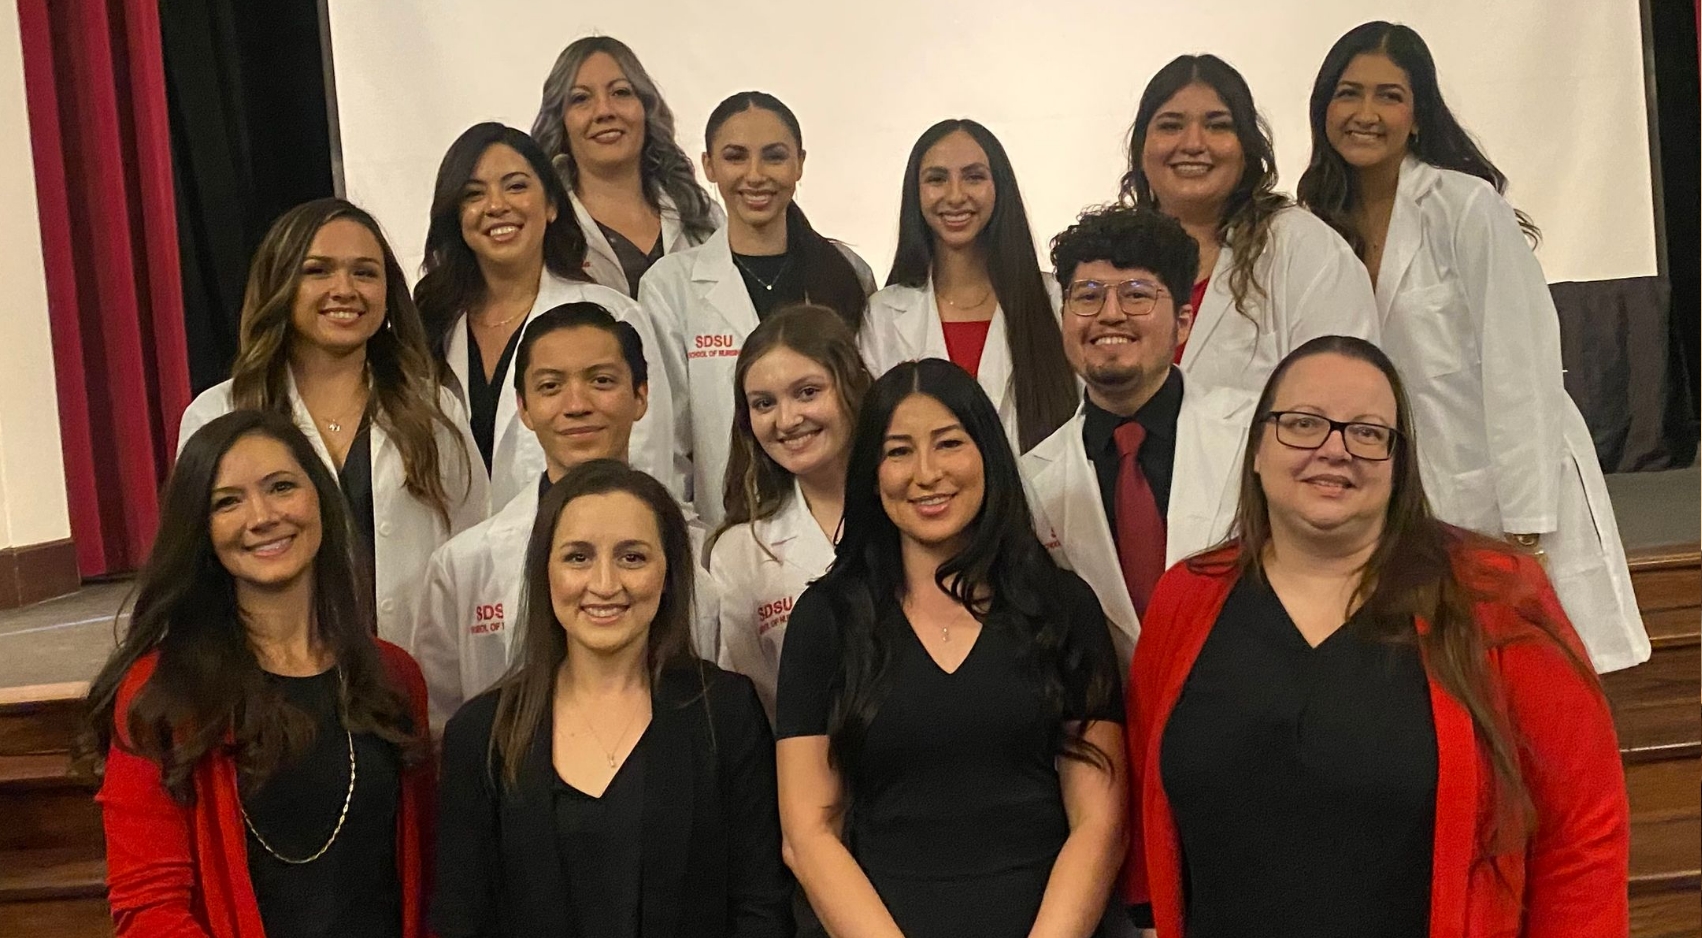 Students in SDSU Imperial Valley's new accelerated Bachelors of Nursing program pose in their white coats, along with their instructors. (Courtesy of Andrea Sanchez)